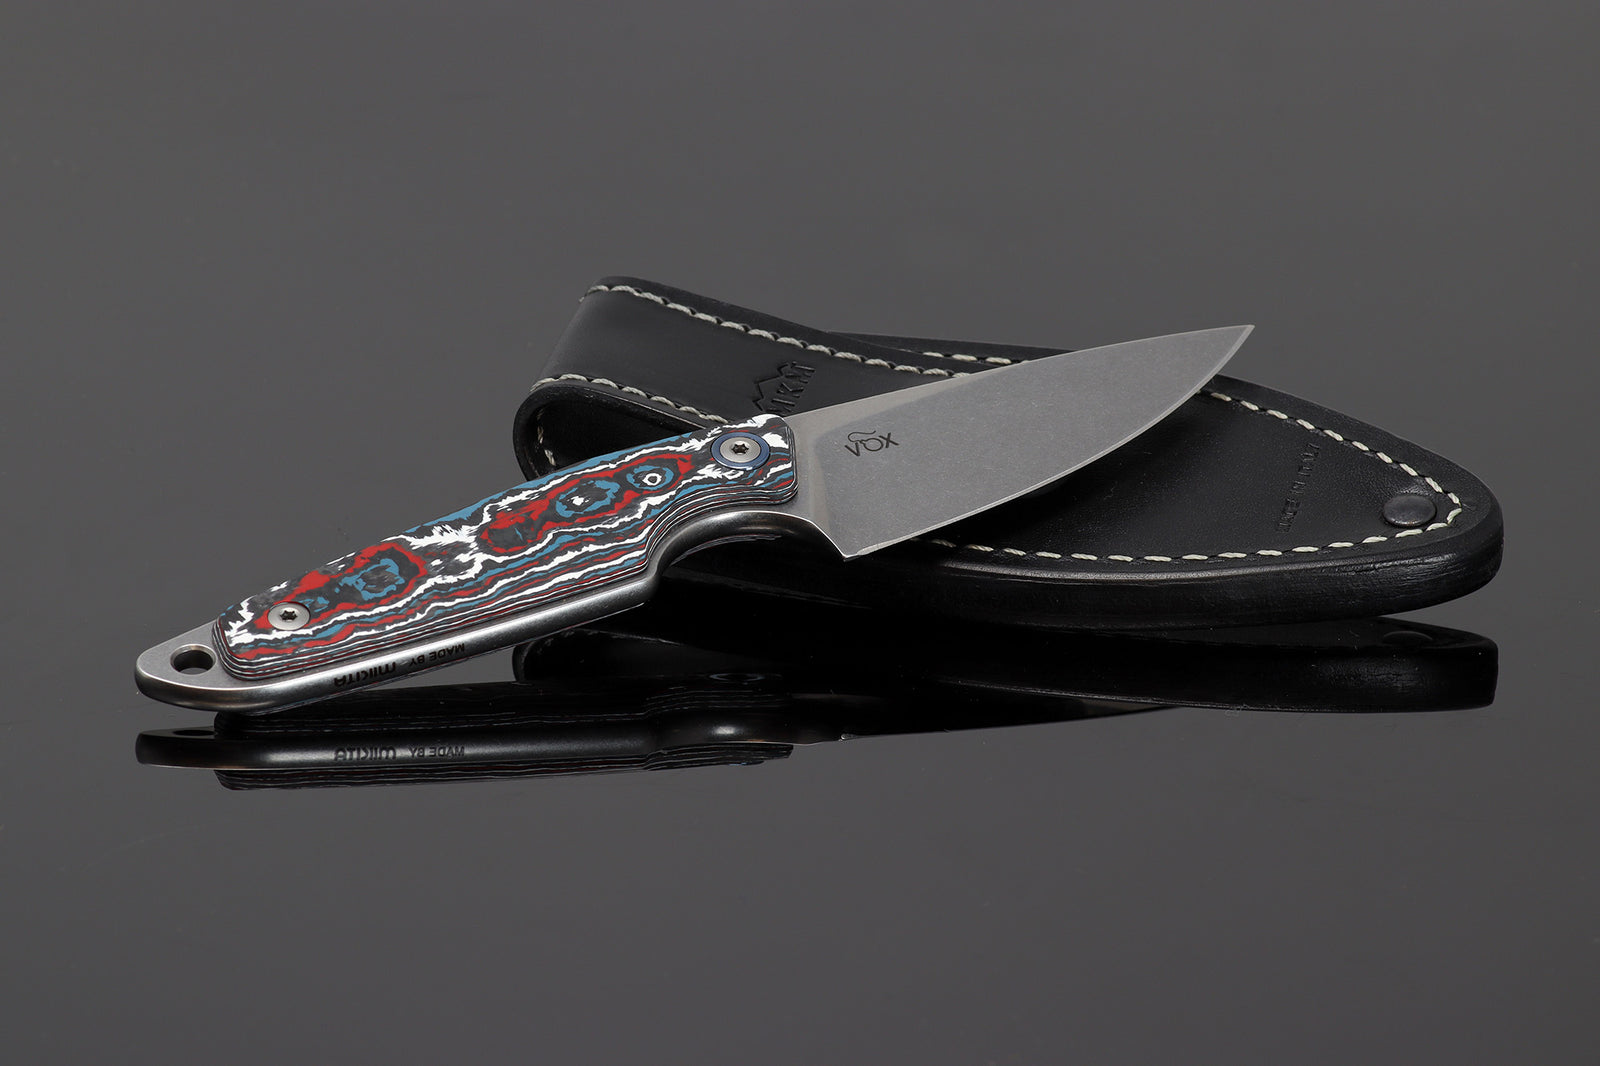 Kaviso x MKM Makro Drop Point Fixed Blade Knife with Fat Carbon Nebula Scales and M390 Stonewashed Blade by Jesper Vox